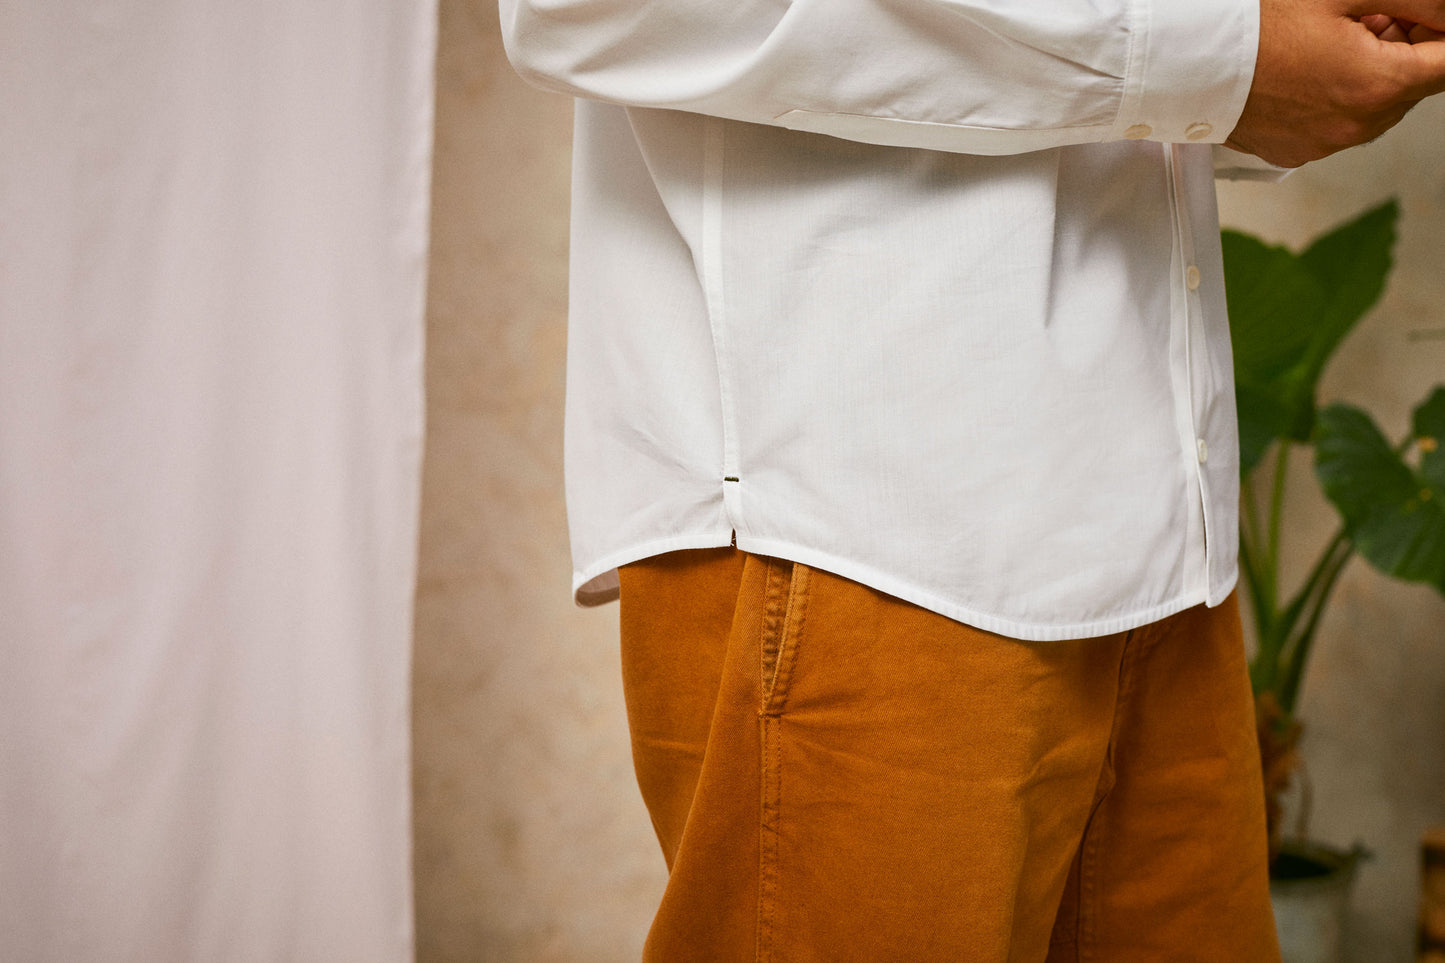 Close up of model's hips, wearing Saywood's Eddy Mens mens white Shirt. Worn with tabacco trousers just visible. Model holds both hands in front of his waist, showing the side split and contrast dark green bar tack at the side hem. A plant and drop of pink fabric can be seen in the background.